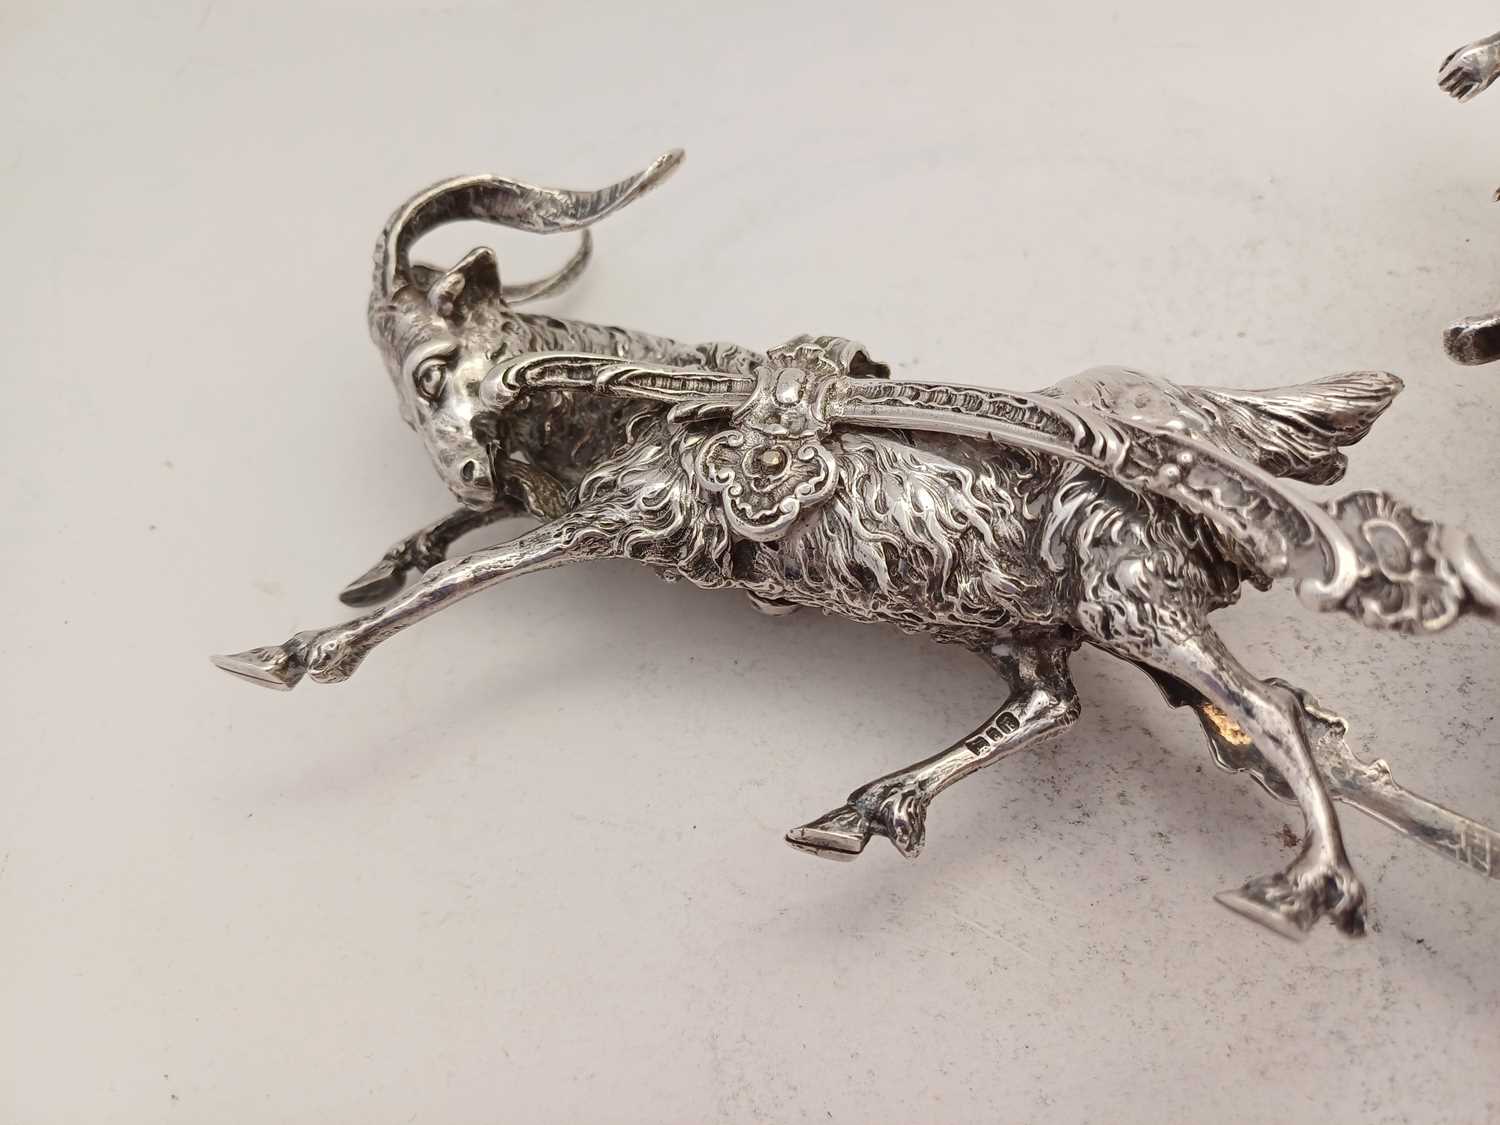 A German Silver Model of a Goat and Putto, by Neresheimer, Hanau, With English Import Marks for Ber - Image 7 of 9